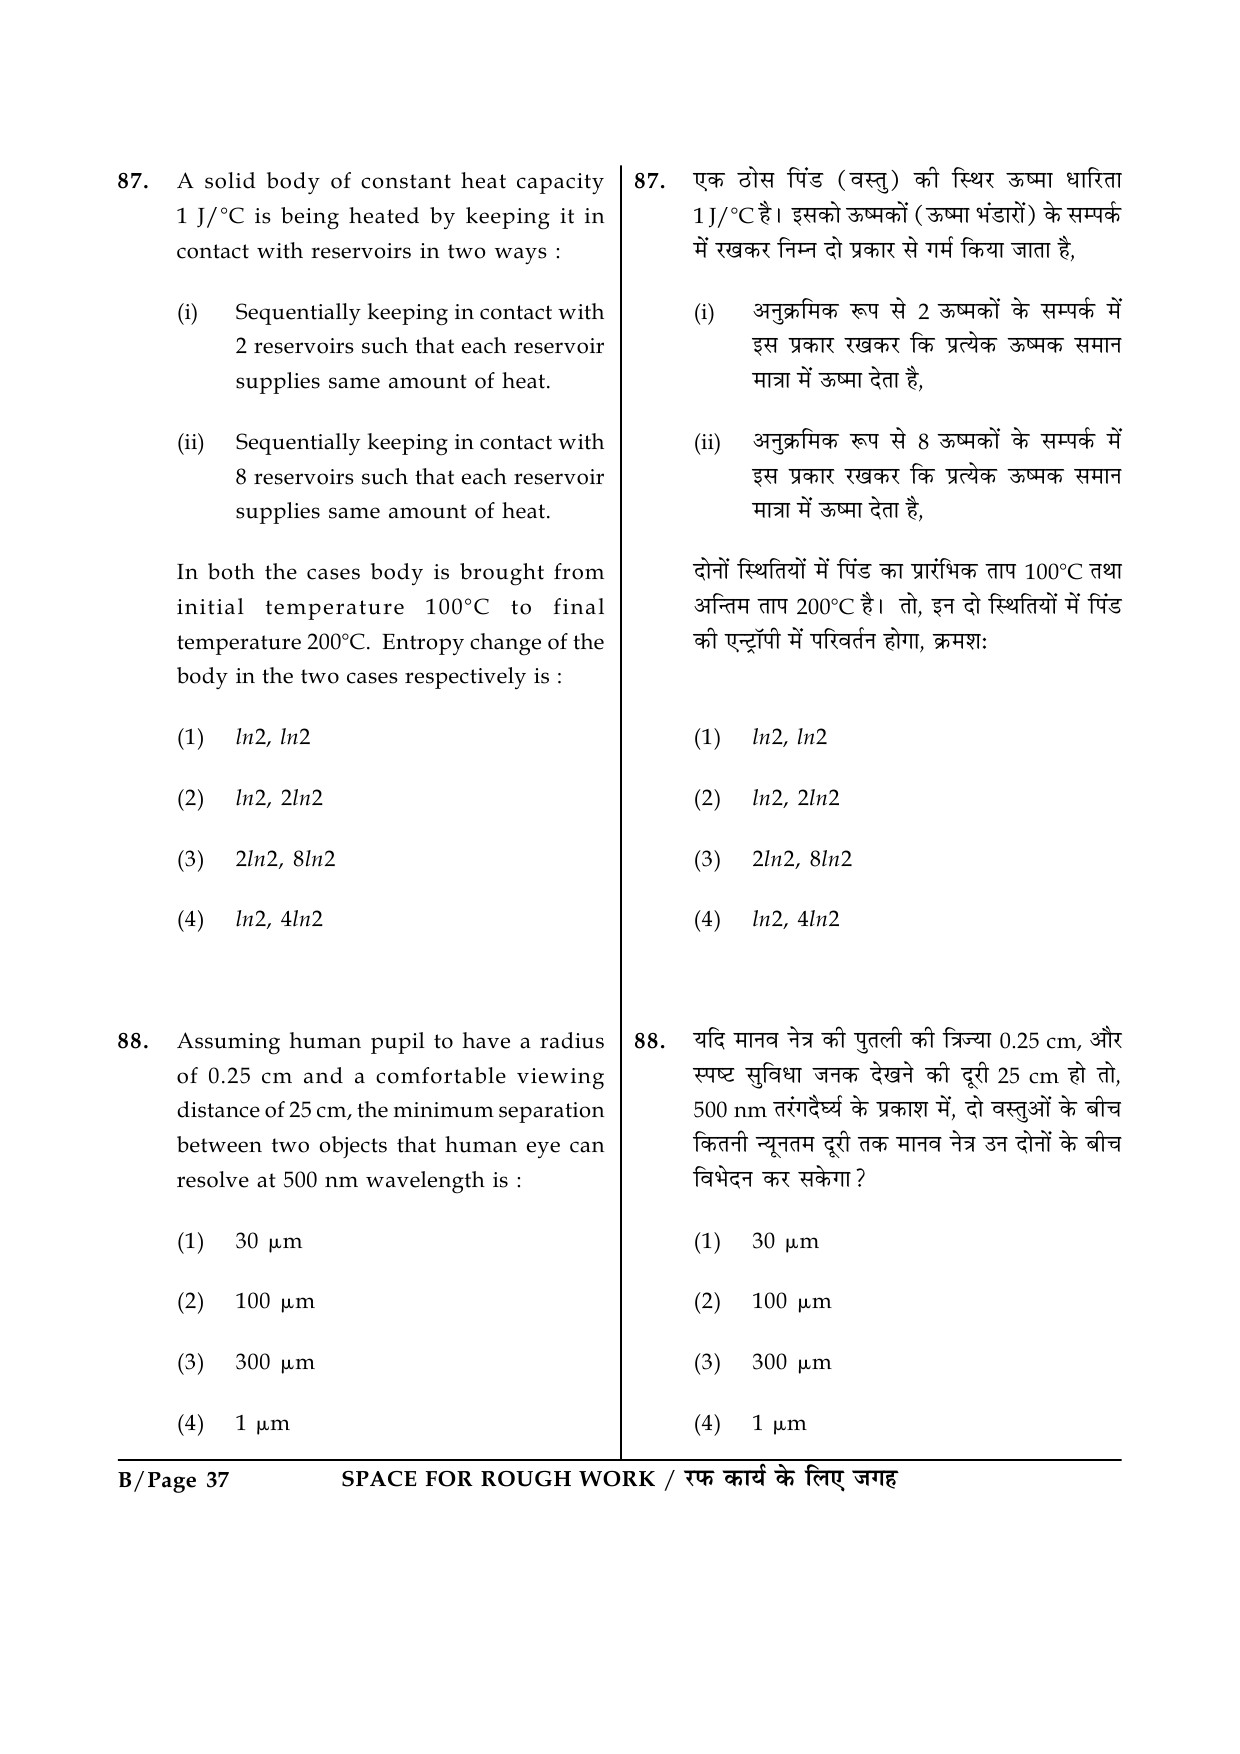 JEE Main Exam Question Paper 2015 Booklet B 37